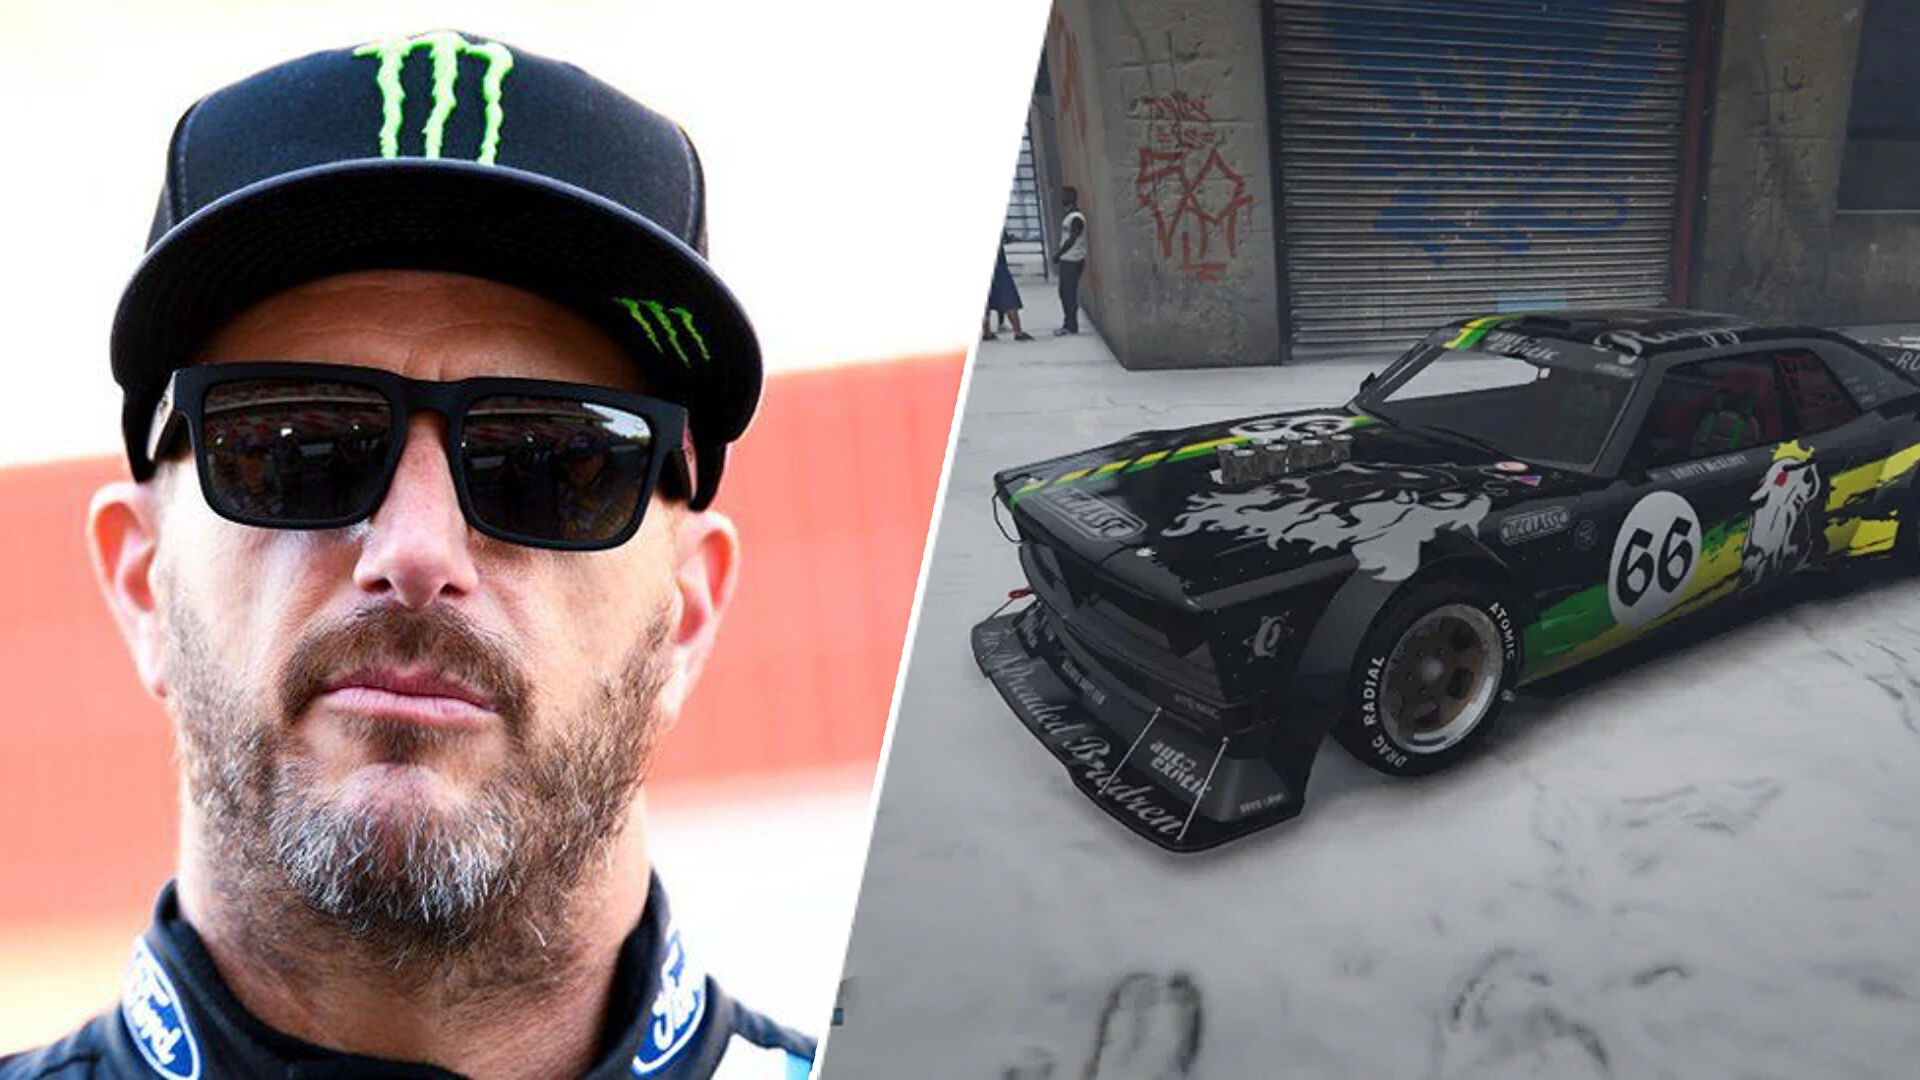 Gta online players pay respects to ken block by recreating his classic ford mustang